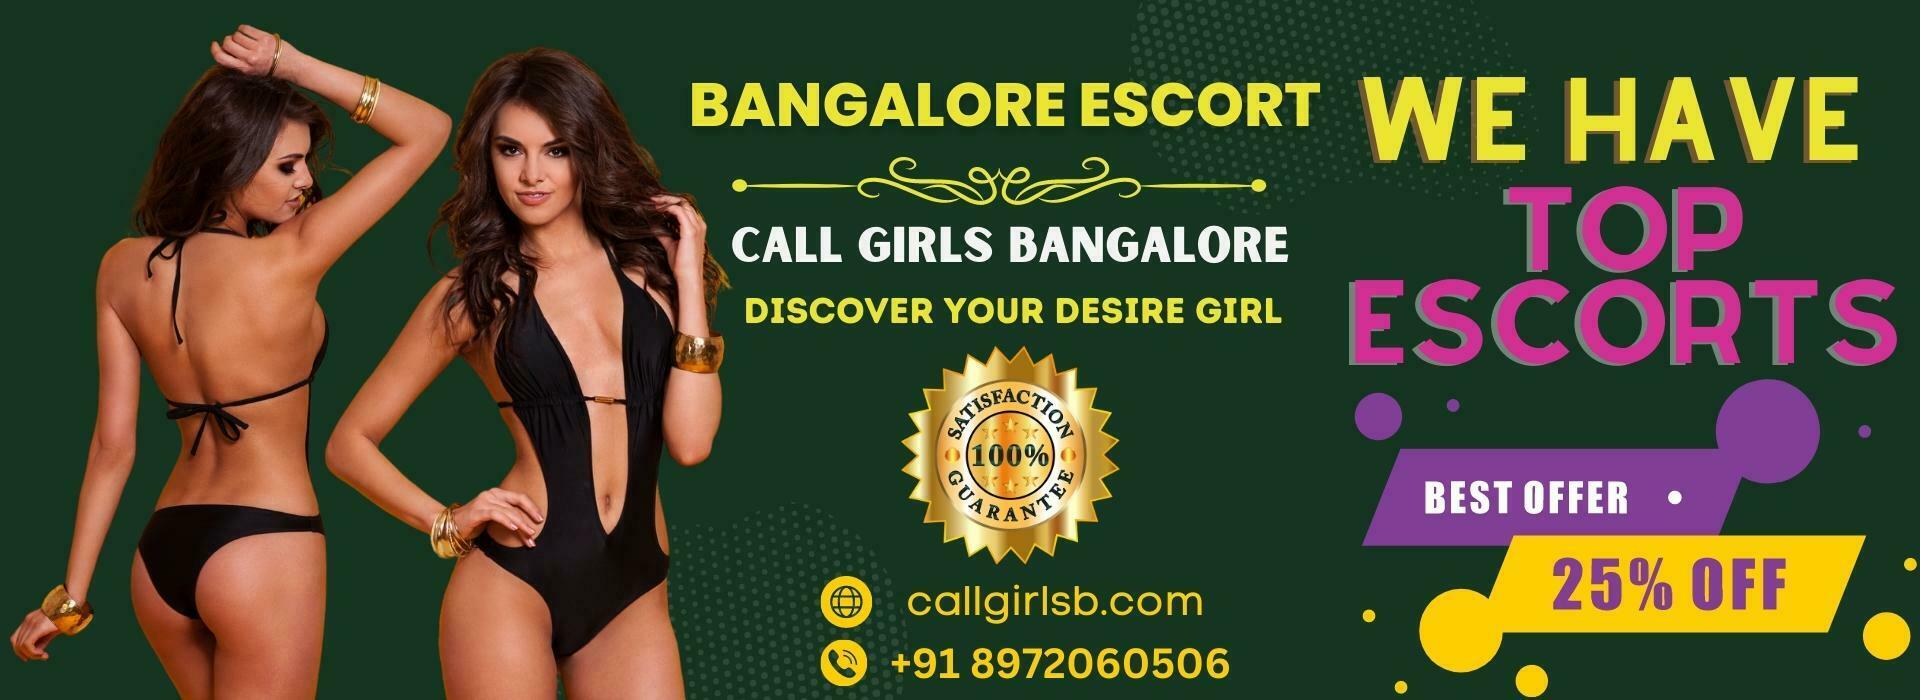 indian escort, verified escort service, sexy girls, vip escort model in banglore, contact, privacy policy, Bangalore escort service independent call girls, female escort in bangalore, independent escort girls, escort girl in bangalore, call girl in bangalore, female escorts in bangalore, escort service bangalore, high profile model, escort girl phone number, escort mobile number, call girl phone number, best escort service in banglore, best escort girl in banglore, female escort, independent escort, vip escorts, high profile call girl, high class call girl, high class girl, dating escort service, dating apps, dating site, premium escort, premium call girl, call girls, independence home girl, home escort, dating service, VIP escort service, chatting call girl, locanto call girl, locanto call girl, locanto escort, locanto escort girl, Body to body, full body massage, body massage, sensual massage, lingam massage, female to male, happy ending massage, tantric massage, erotic massage, massage spa, spa massage, ladies parlor, ladies parlor near me, massage near me, massage spa near me, spa massage near me, b2b massage, b2b massage near me, body to body spa near me, spa near me, b2b spa, b2b spa near me, female to male spa near me, female to male spa, female to male massage, massage parlor near me, massage parlor, body massage, body massage near me, massage center near me, massage center, russian escort,